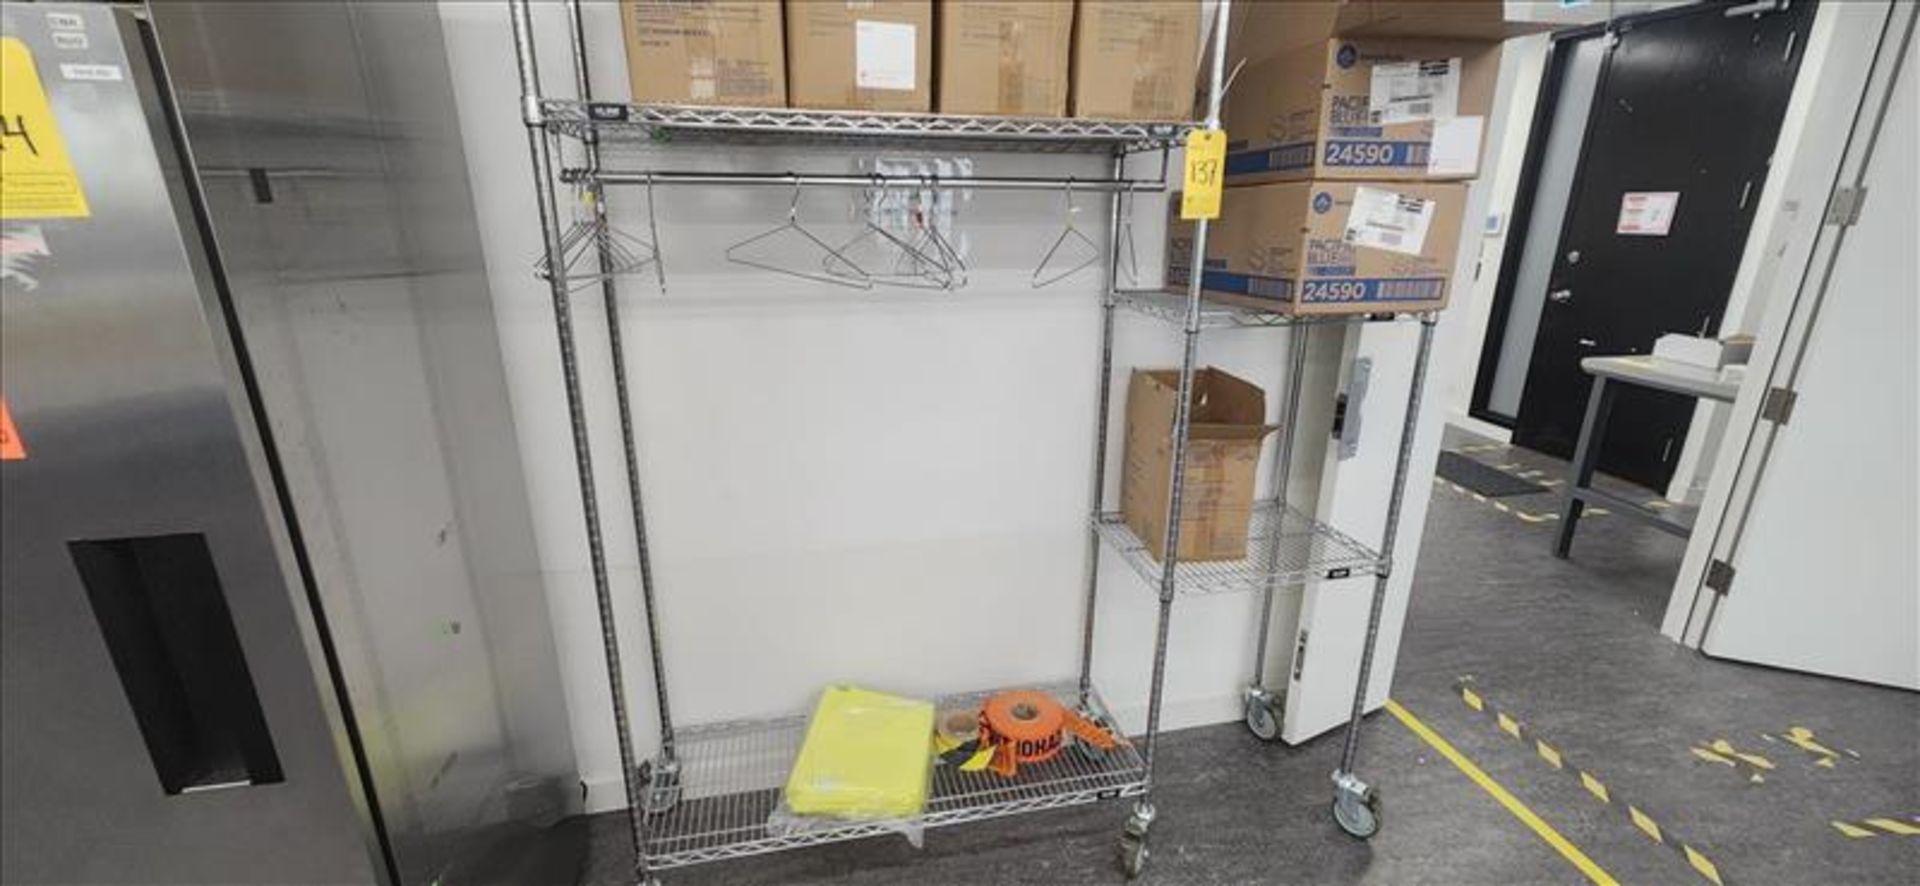 Uline Wire Rack w/ casters approx. 18 in. x 70 in. x 72 in. height